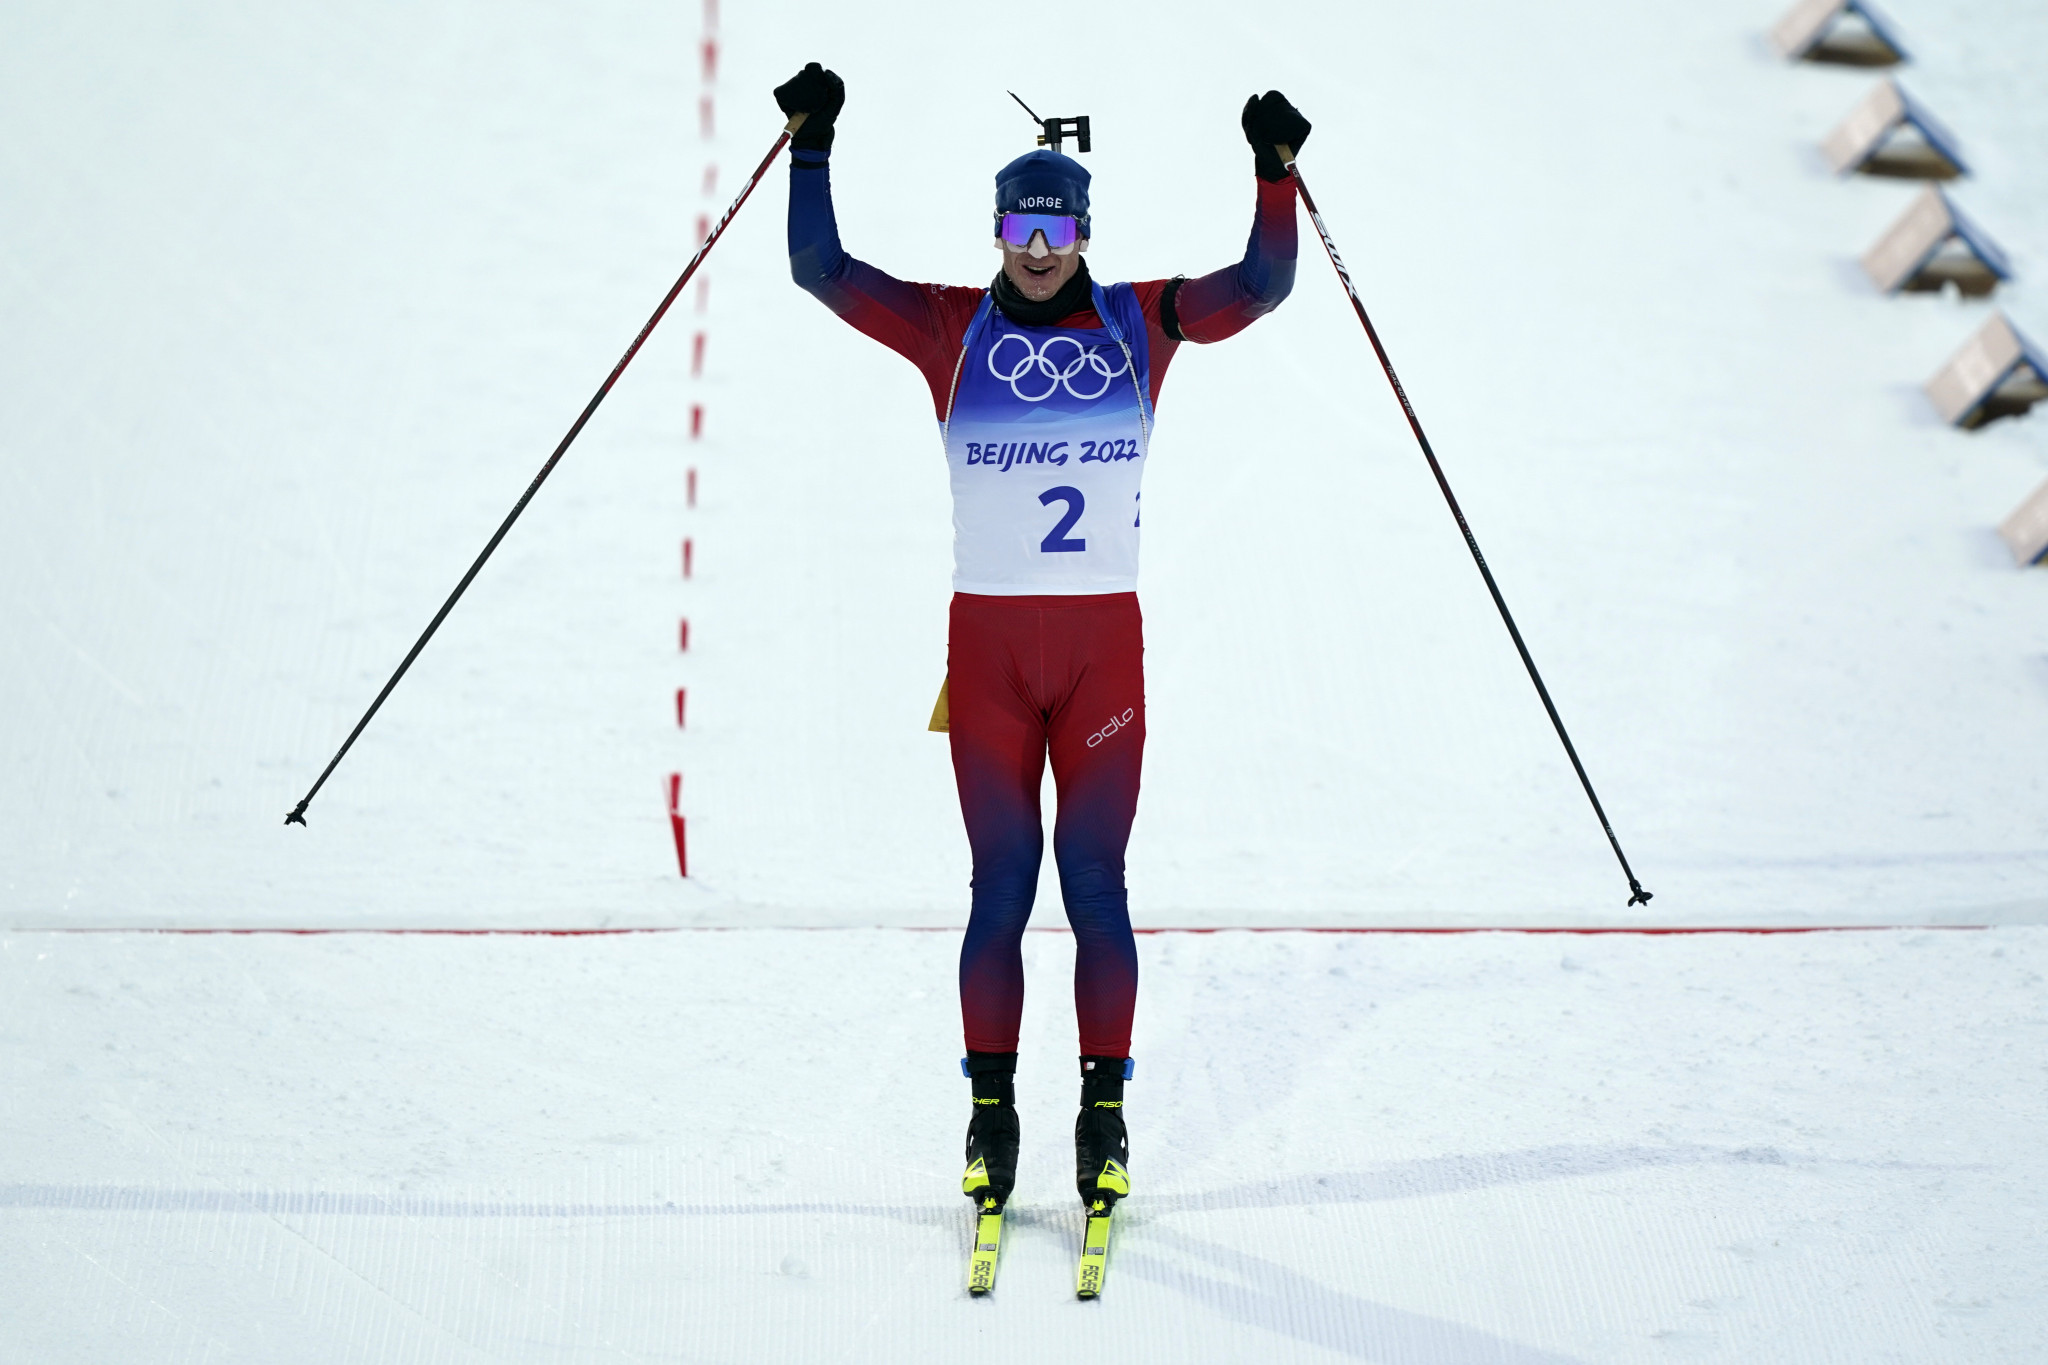 Biathlete Bø ends World Cup season early to take time off